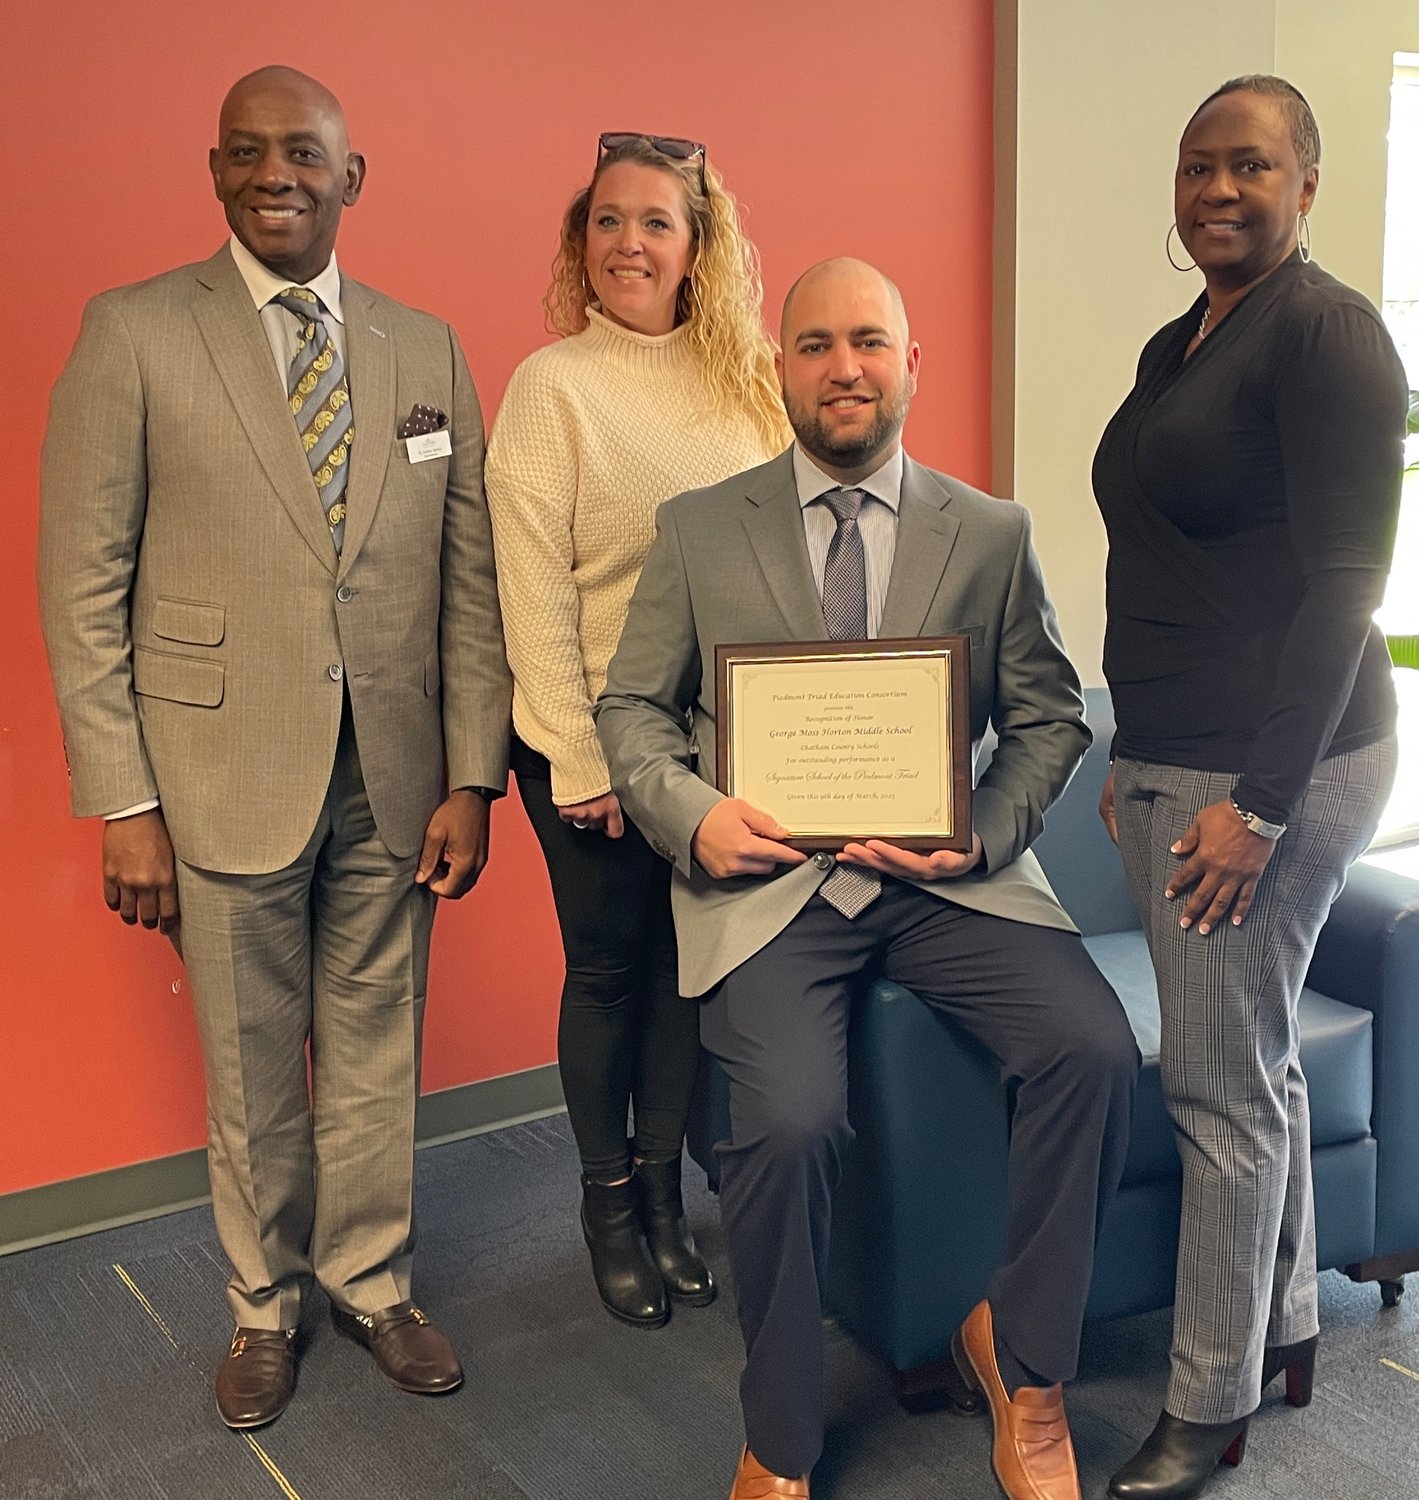 George Moses Horton Middle School was named a Signature School by the Piedmont Triad Education Consortium. From left to right: Dr. Anthony Jackson; Colleen D'Angelo, 5th grade teacher; Bradyn Robinson, principal; Nina Eaddy, 7th grade teacher.